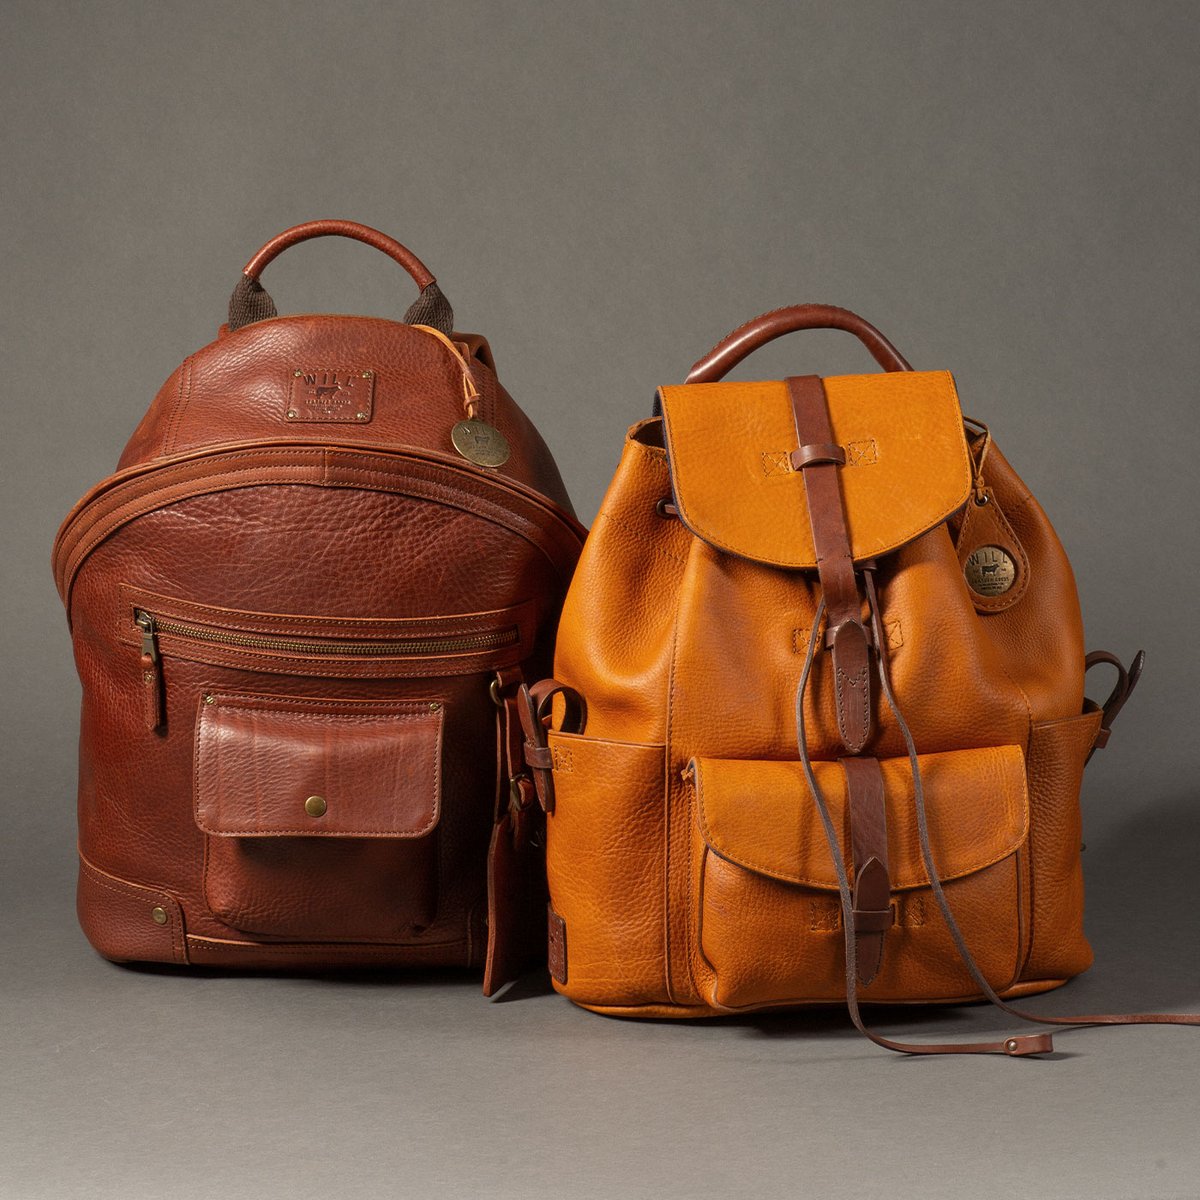 Choose a leather backpack that will age alongside you, every scuff a souvenir from the road of your life. 
bit.ly/WLG_Backpacks

#backpack #backpacking #backpacker #backpacks #hiking #adventure #travelbag #leatherbag #backpackers #fathersdaygift #graduationgift